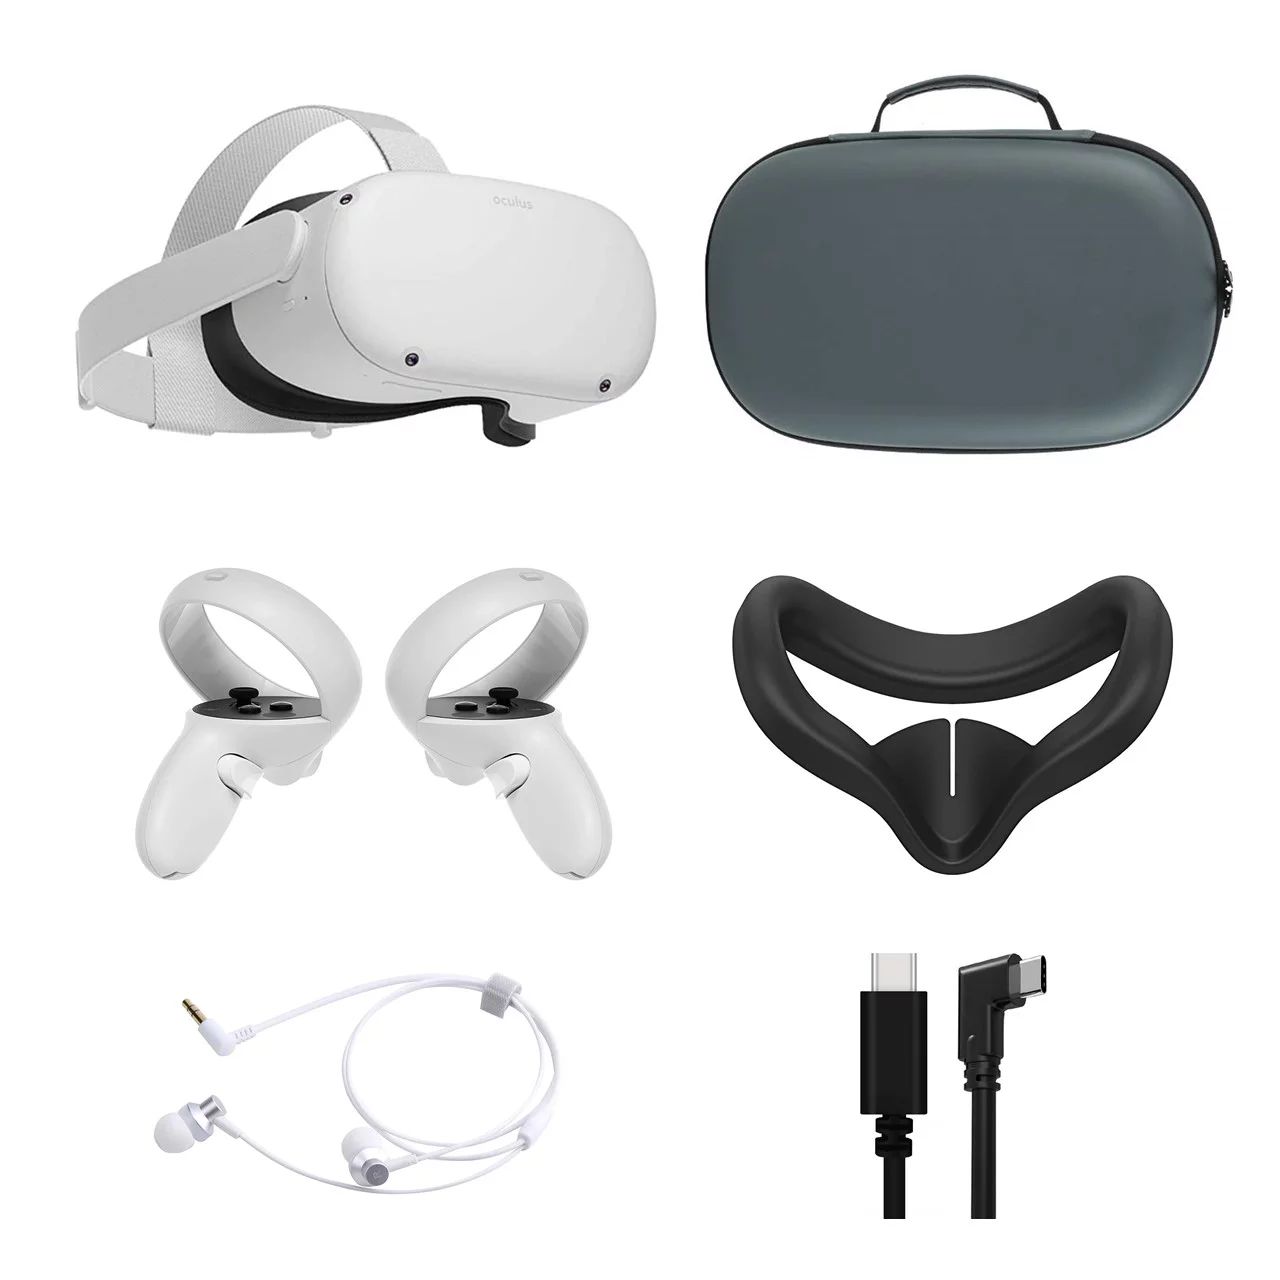 2021 Oculus Quest 2 All-In-One VR Headset, Touch Controllers, 128GB SSD, 1832x1920 up to 90 Hz Re... | Walmart (US)